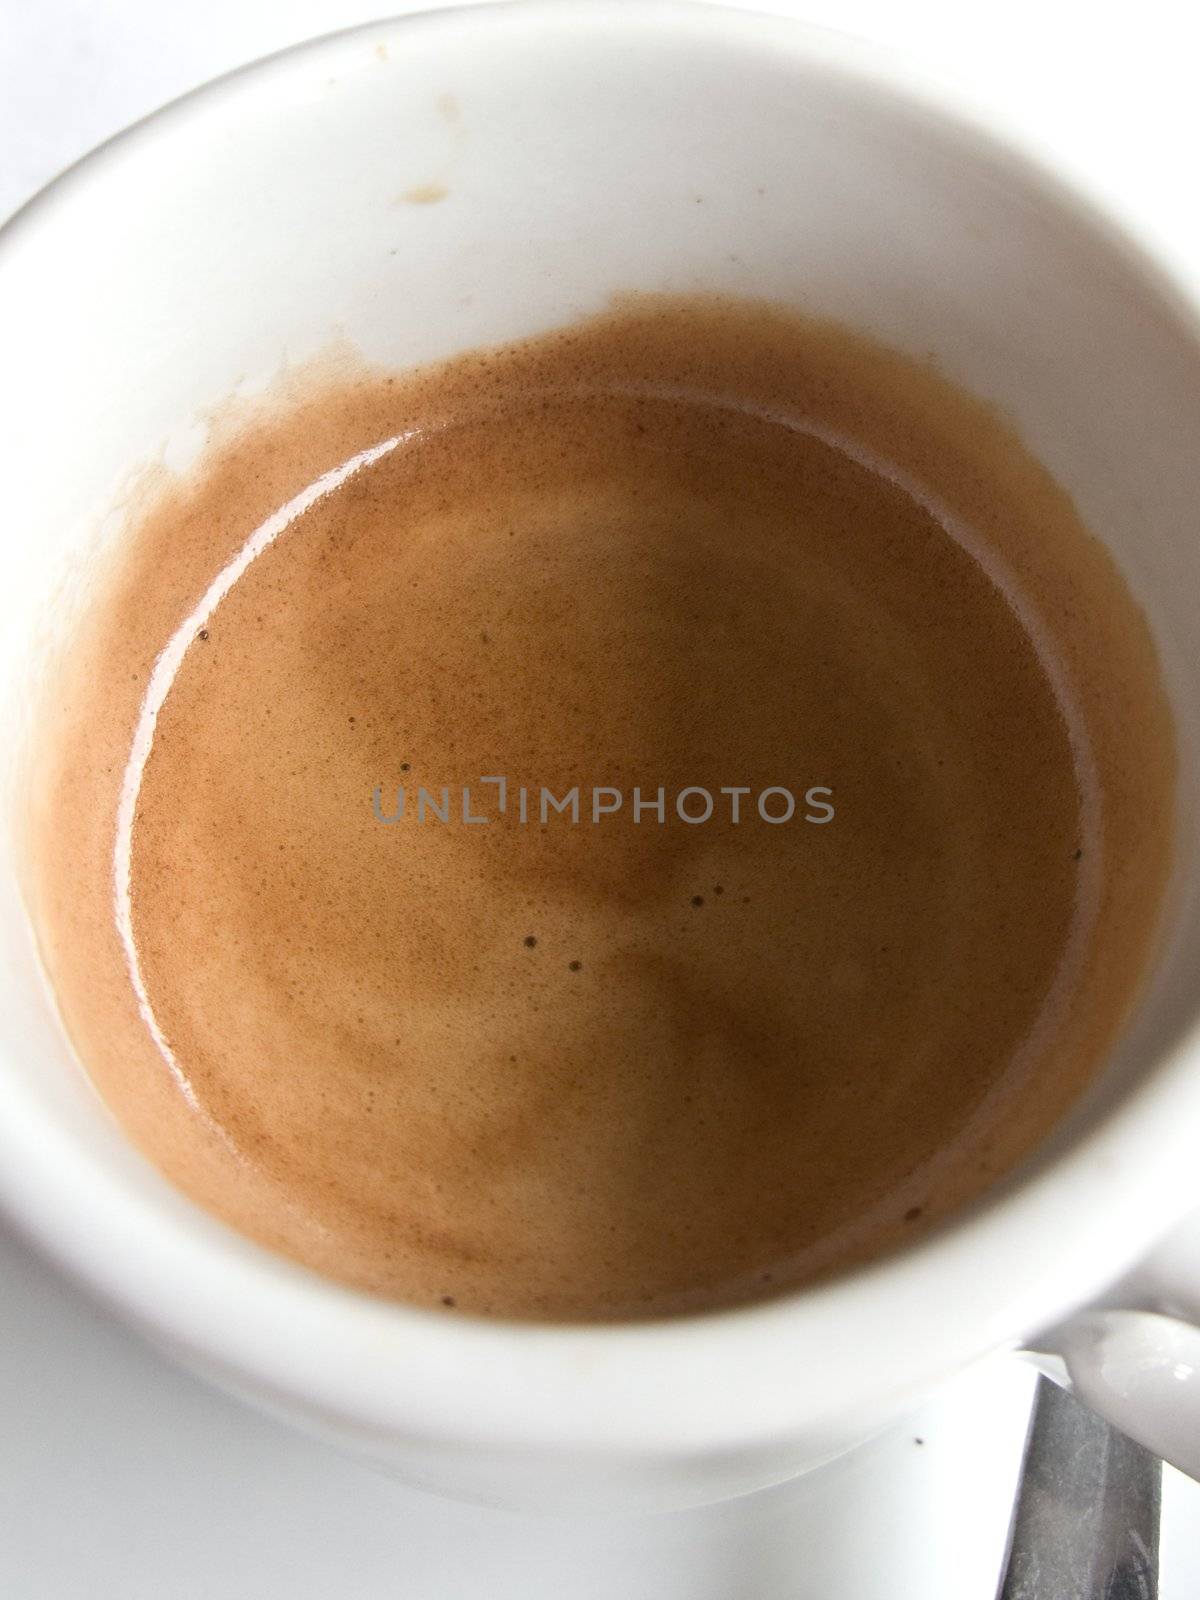 Close up cup of expresso coffe